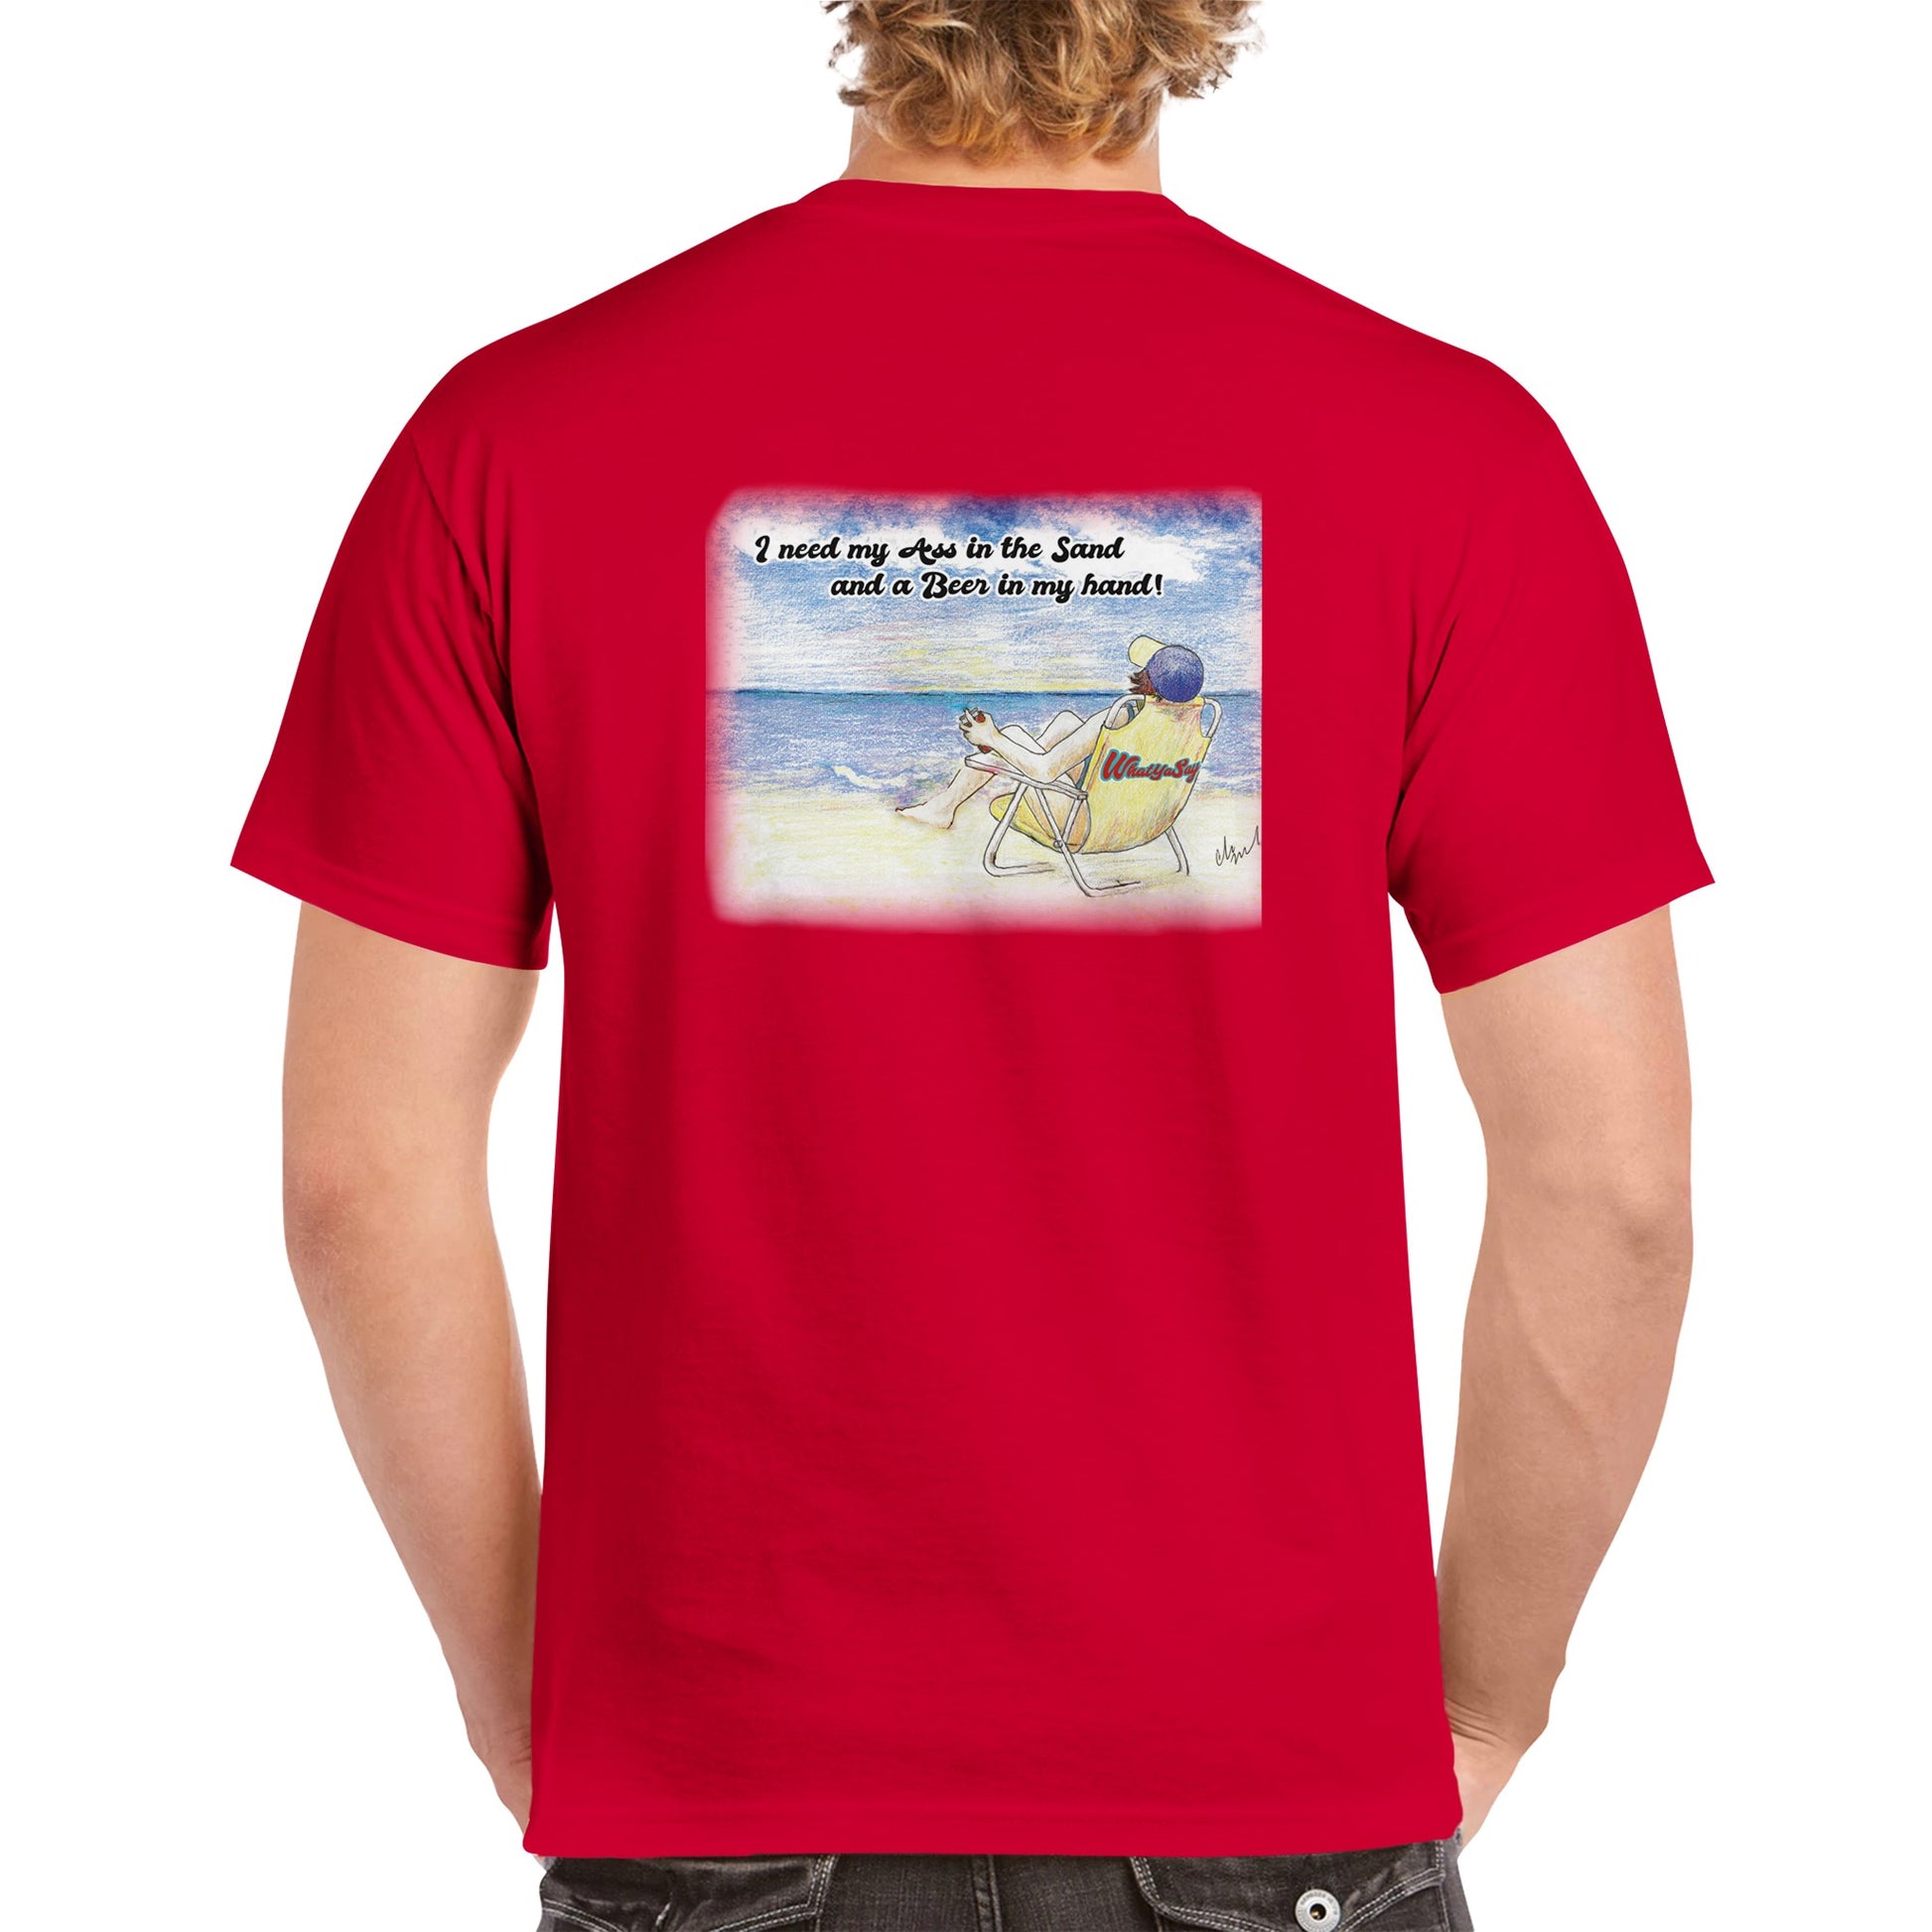 A rear view of blonde-haired male model wearing a red heavyweight Unisex Crewneck t-shirt with original artwork and motto I need my Ass in the Sand back and WhatYa Say logo on front of t-shirt from WhatYa Say Apparel.